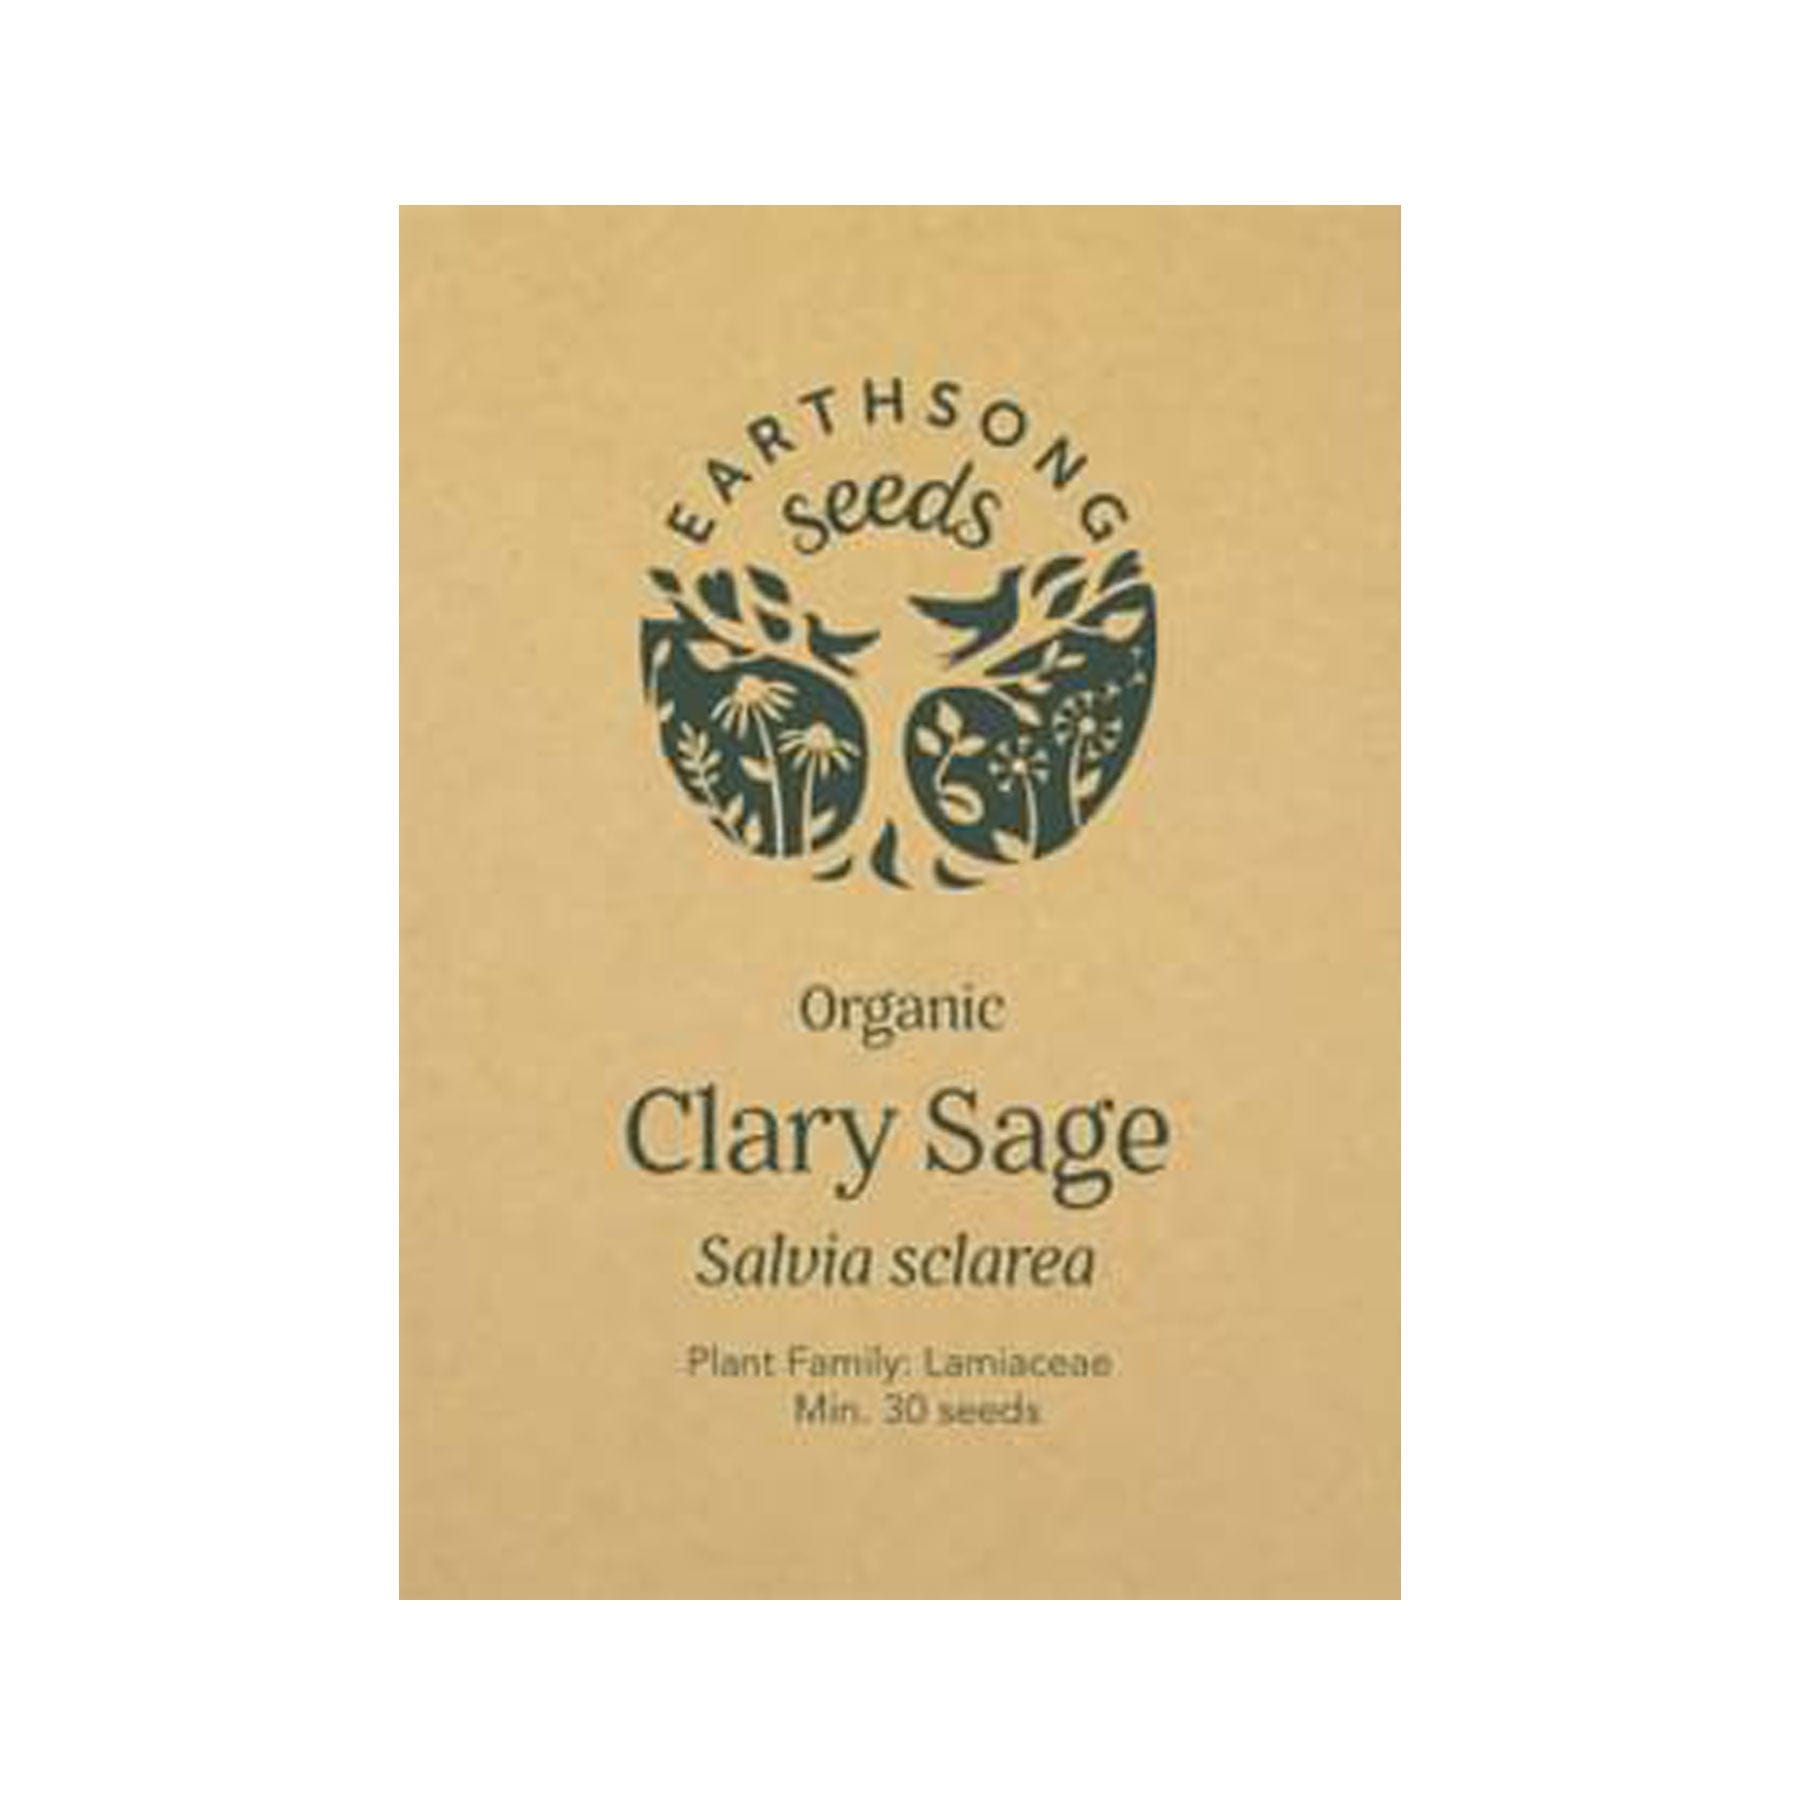 Clary sage seed pack